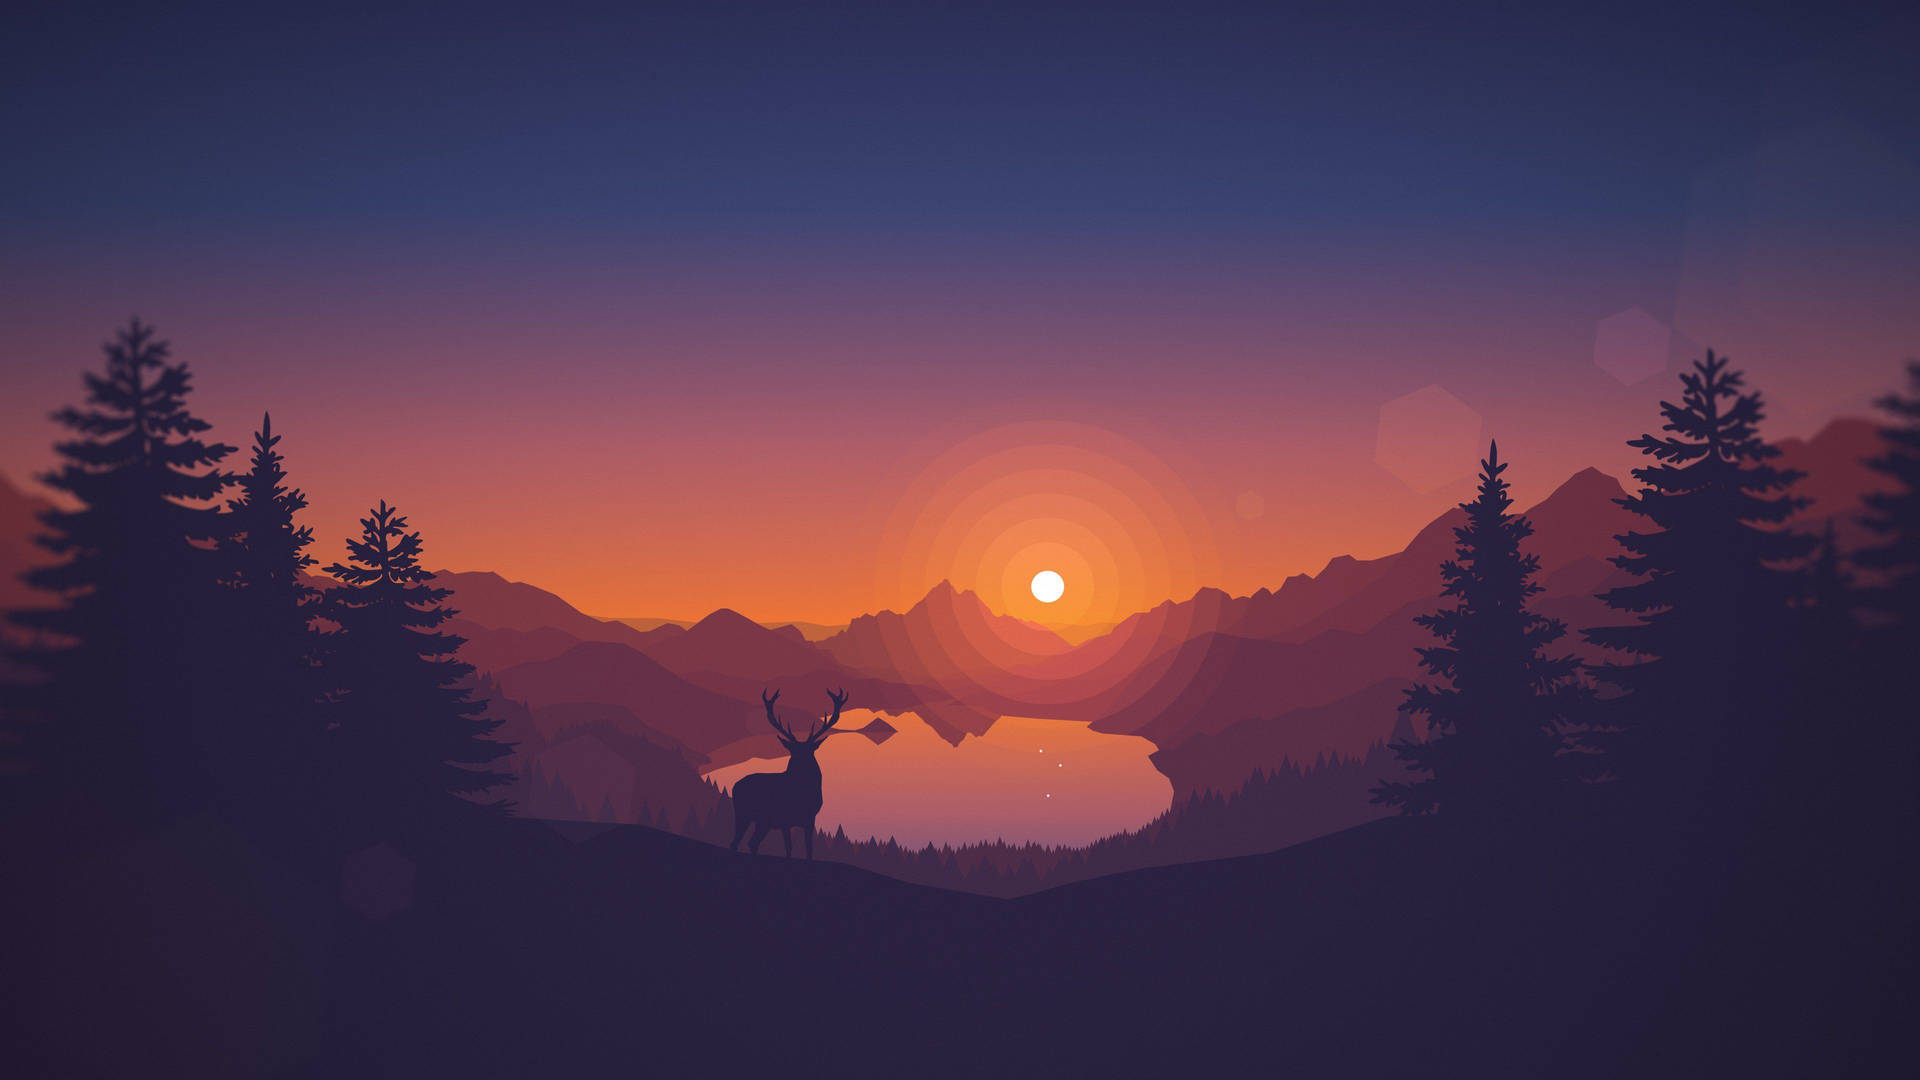 A silhouette of a mountain and deer under the setting sun. Wallpaper